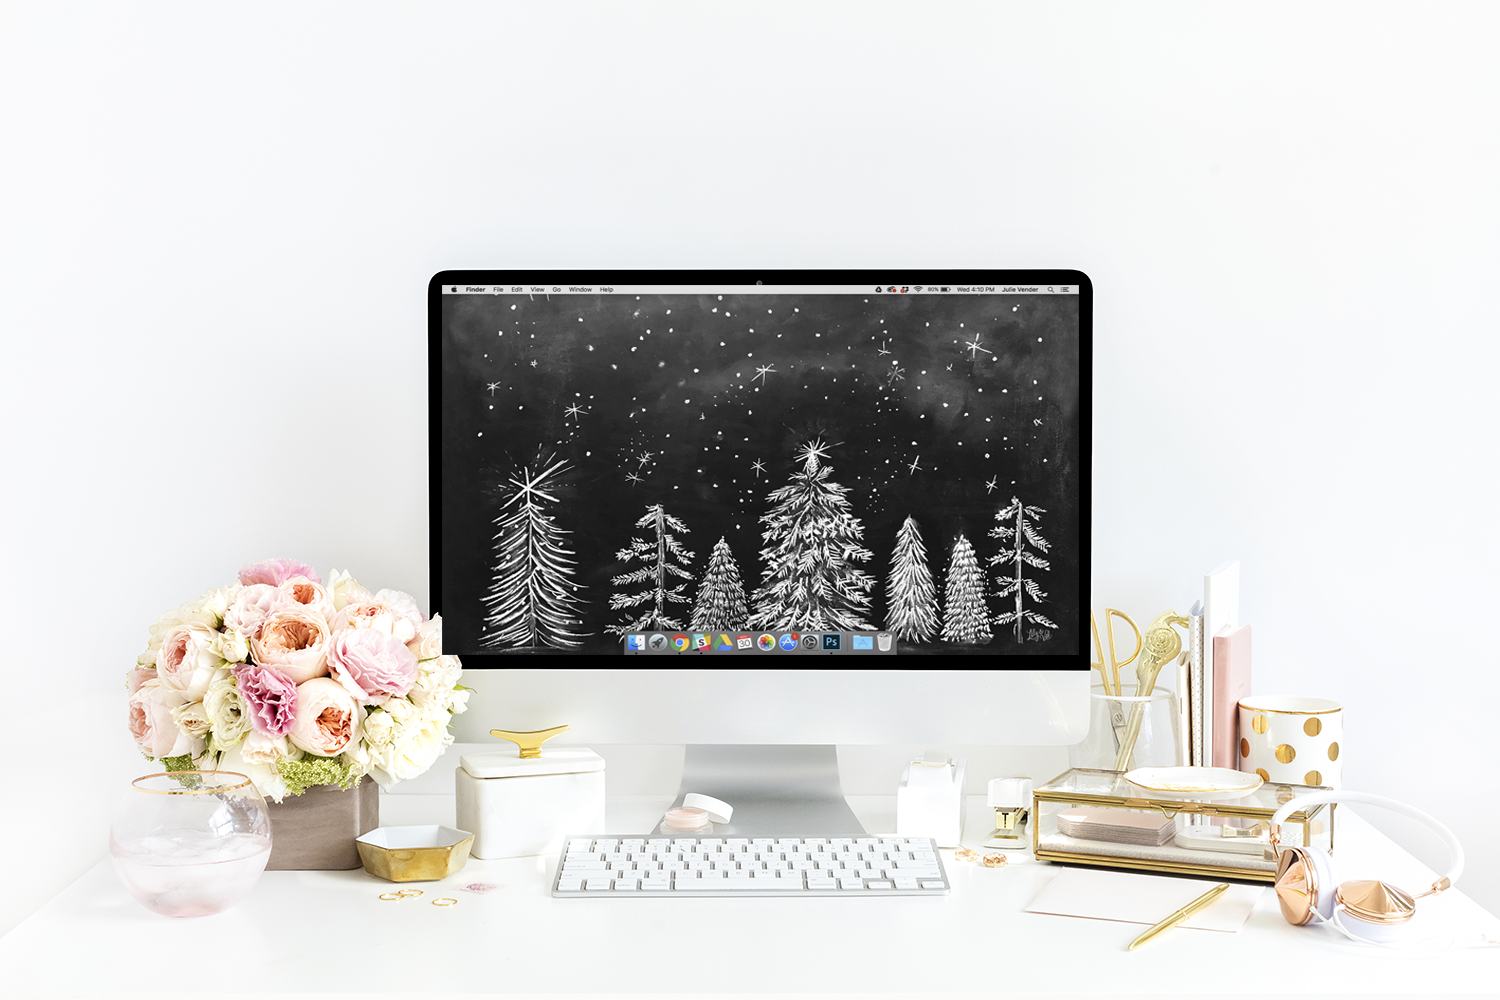 Lily and Val chalk drawing of Christmas trees free desktop download for holiday season